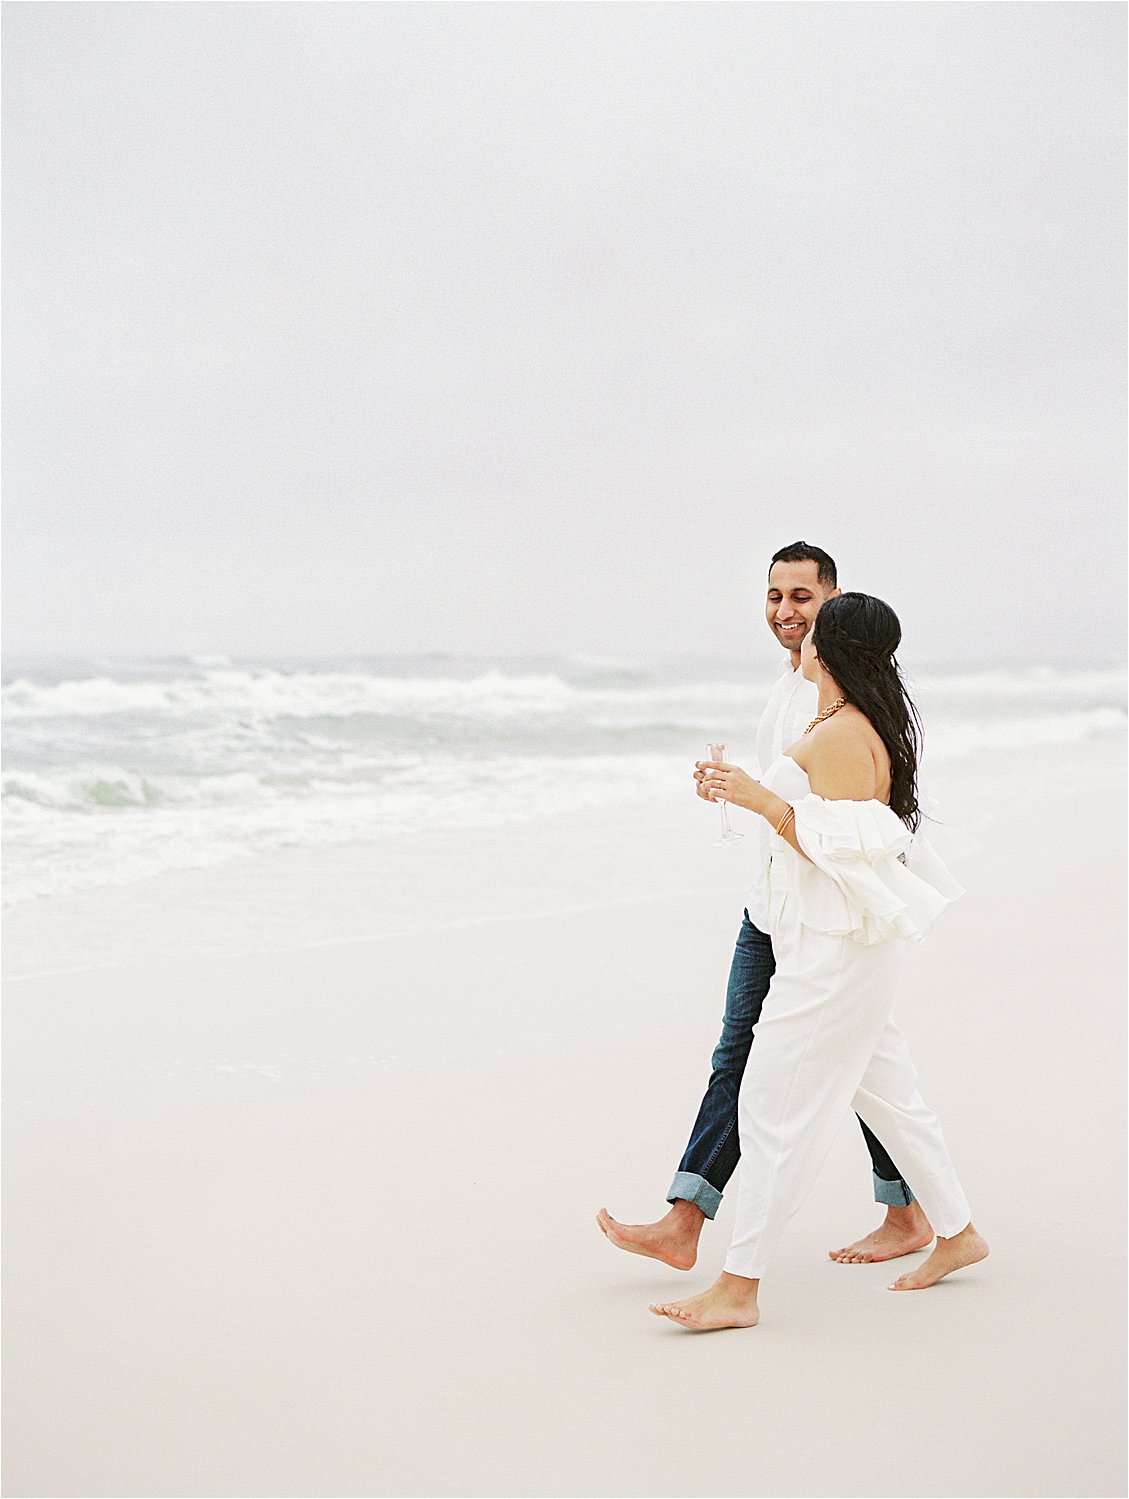 Beach Rosemary Beach Engagement Session by 30A Film Wedding and Engagement Photographer, Renee Hollingshead with South Asian Couple